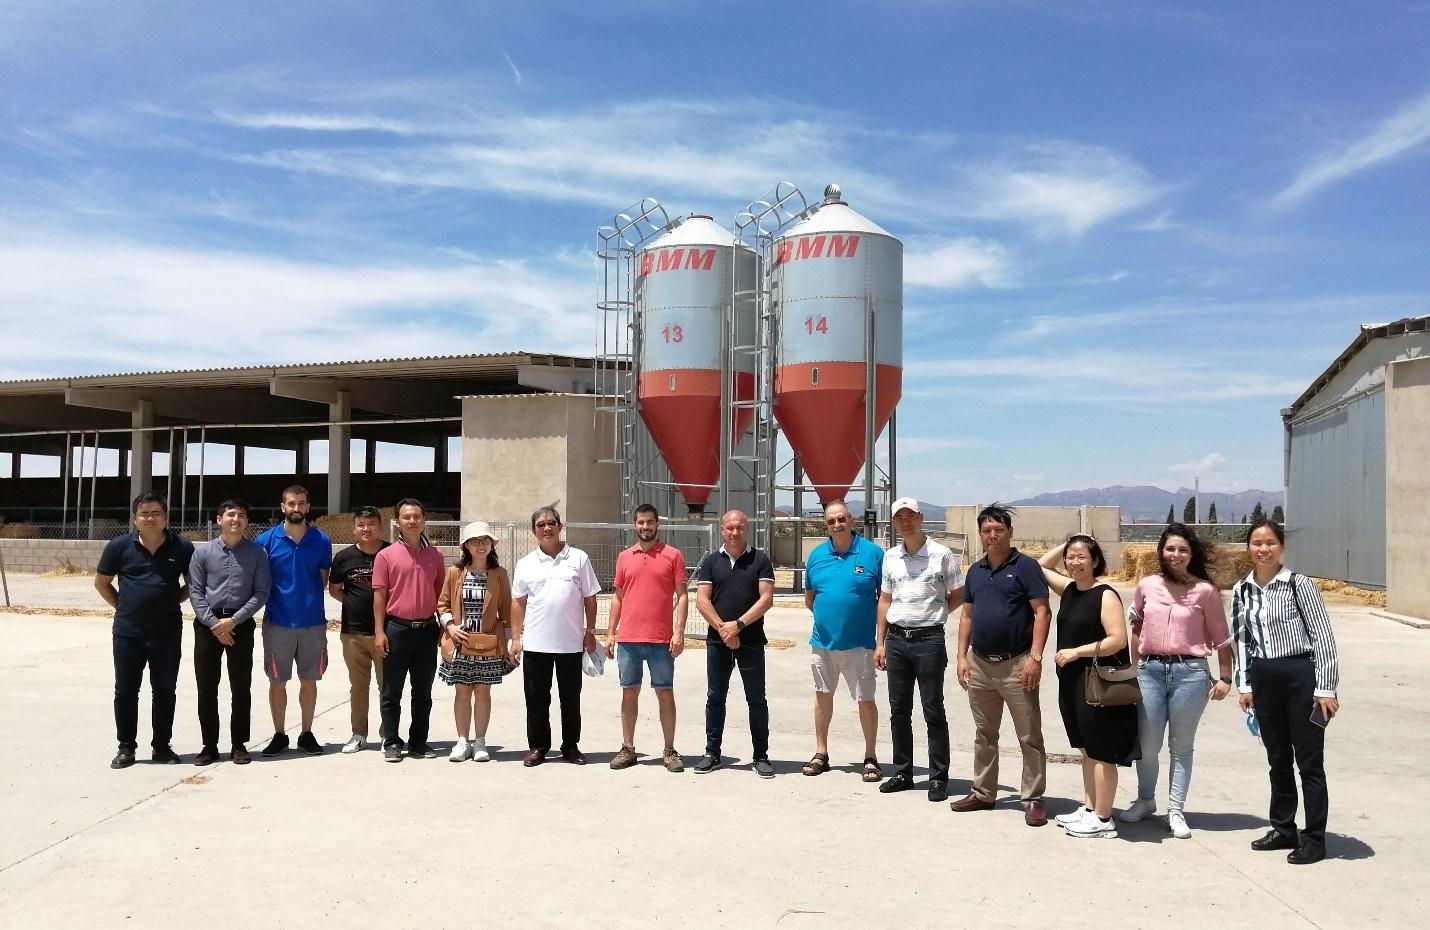 A group of people standing in front of a water tower

Description automatically generated with medium confidence